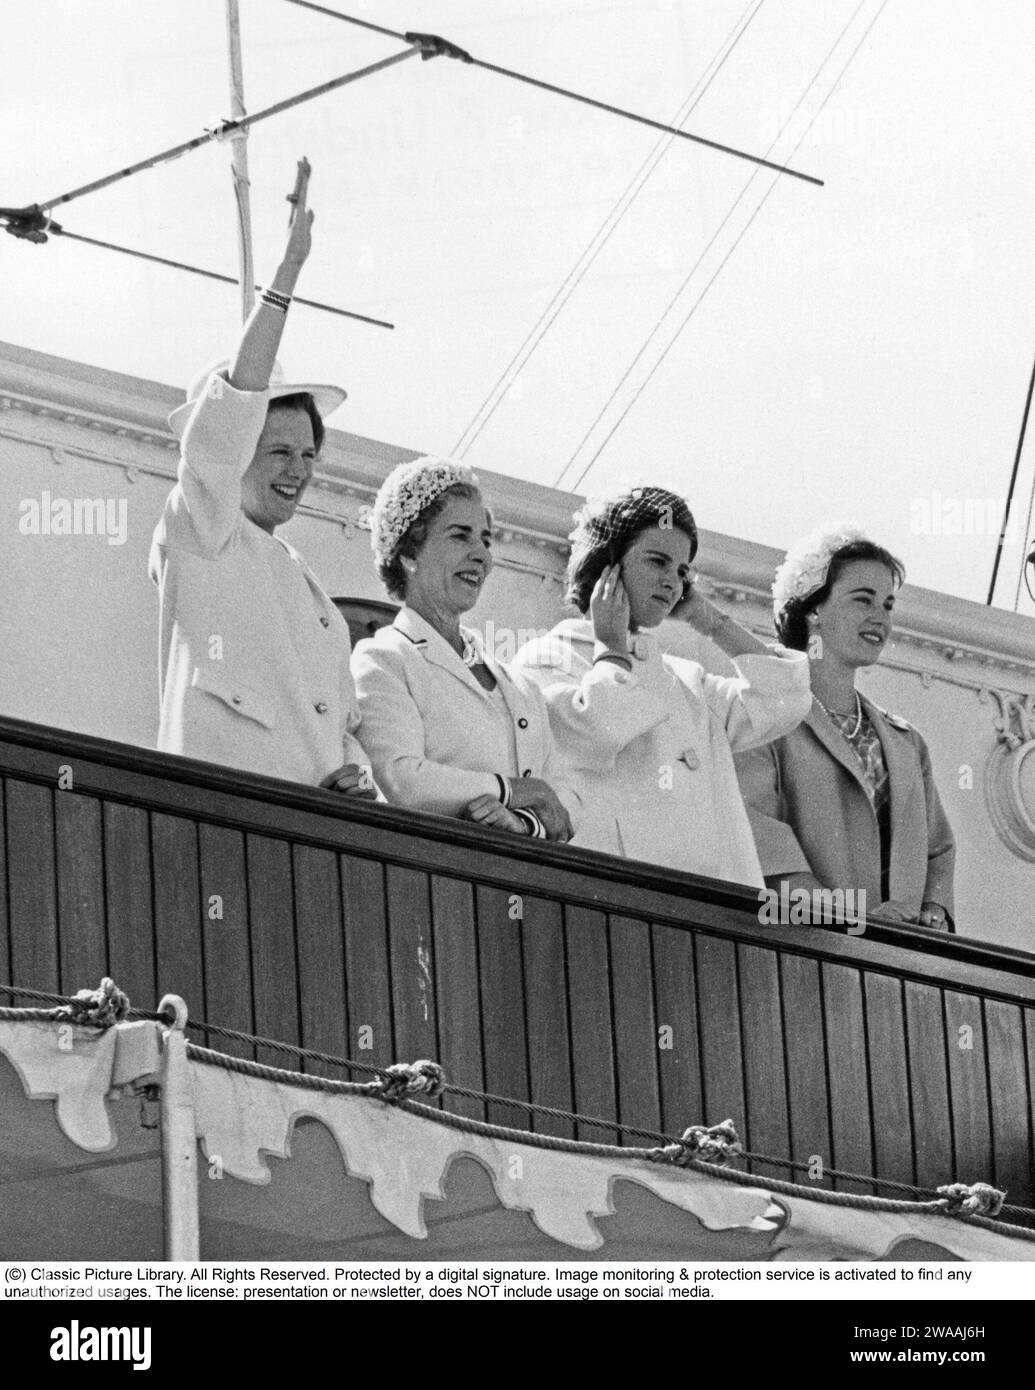 Queen Margrethe II of Denmark. Pictured with her mother Ingrid of Sweden and her sisters Anne-Marie and Benedikte when attending the wedding of swedish princess Margaretha 1964. Waving from the royal ship Dannebrogen. Stock Photo